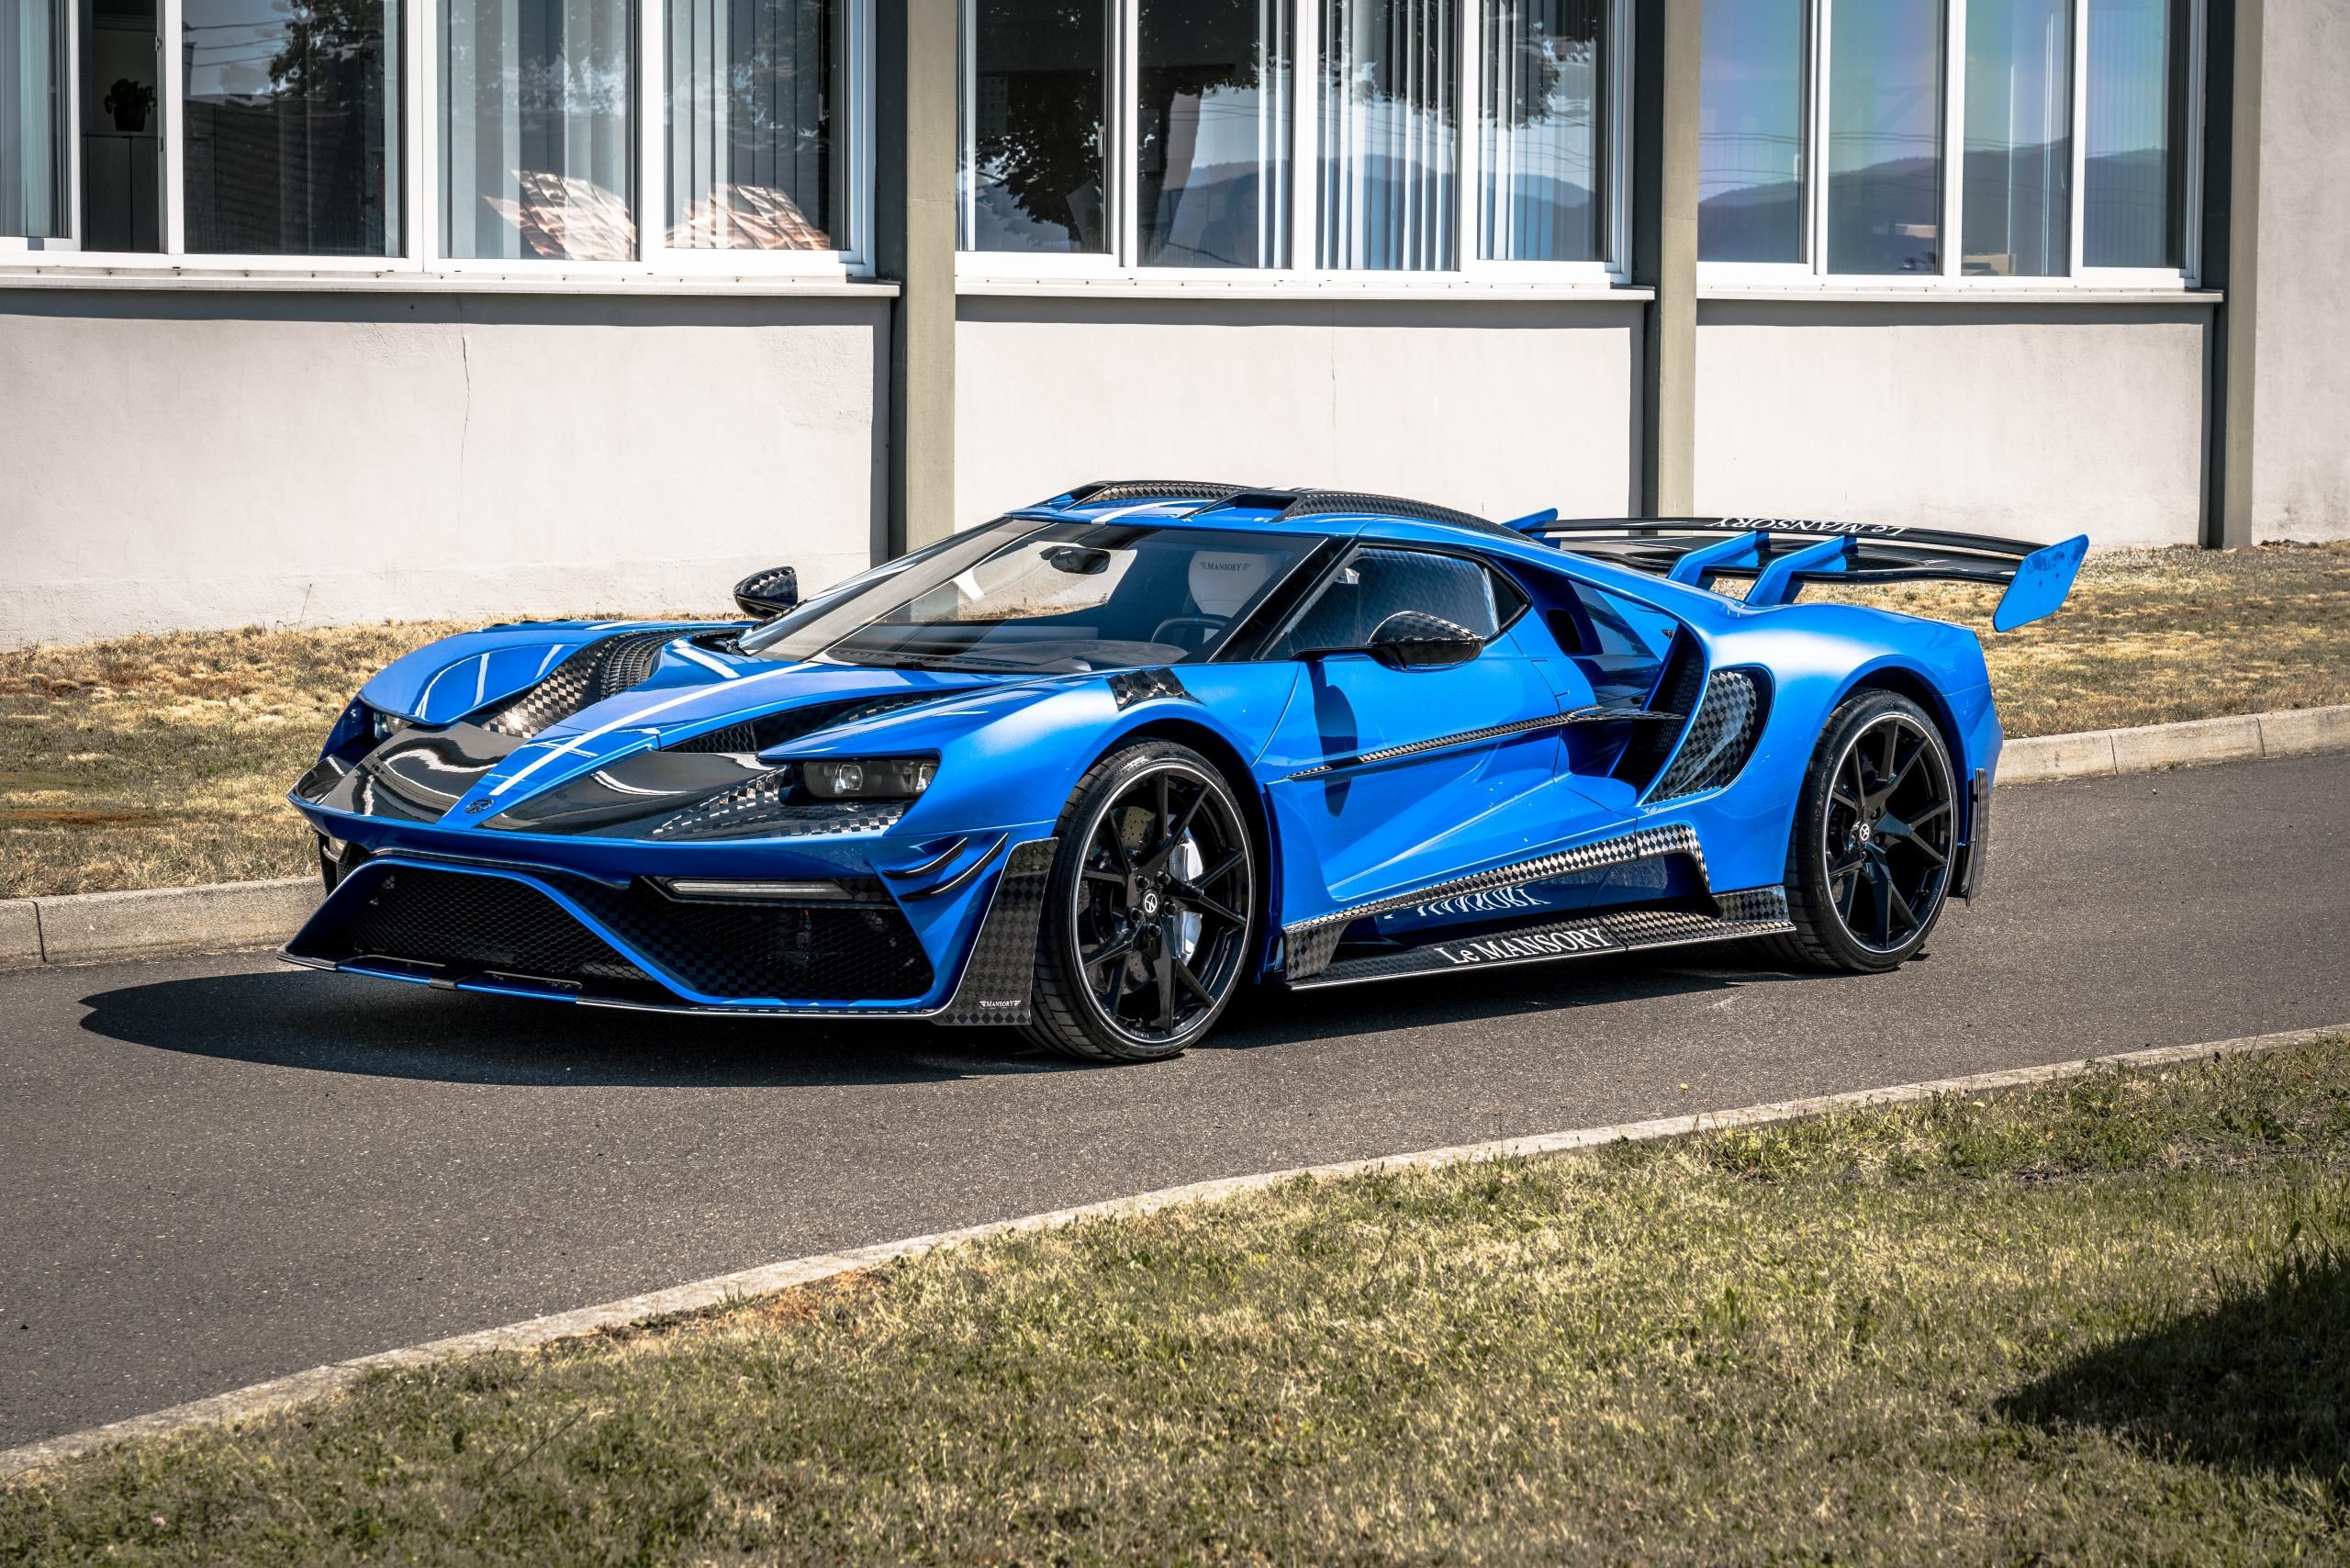 Le MANSORY in Germany